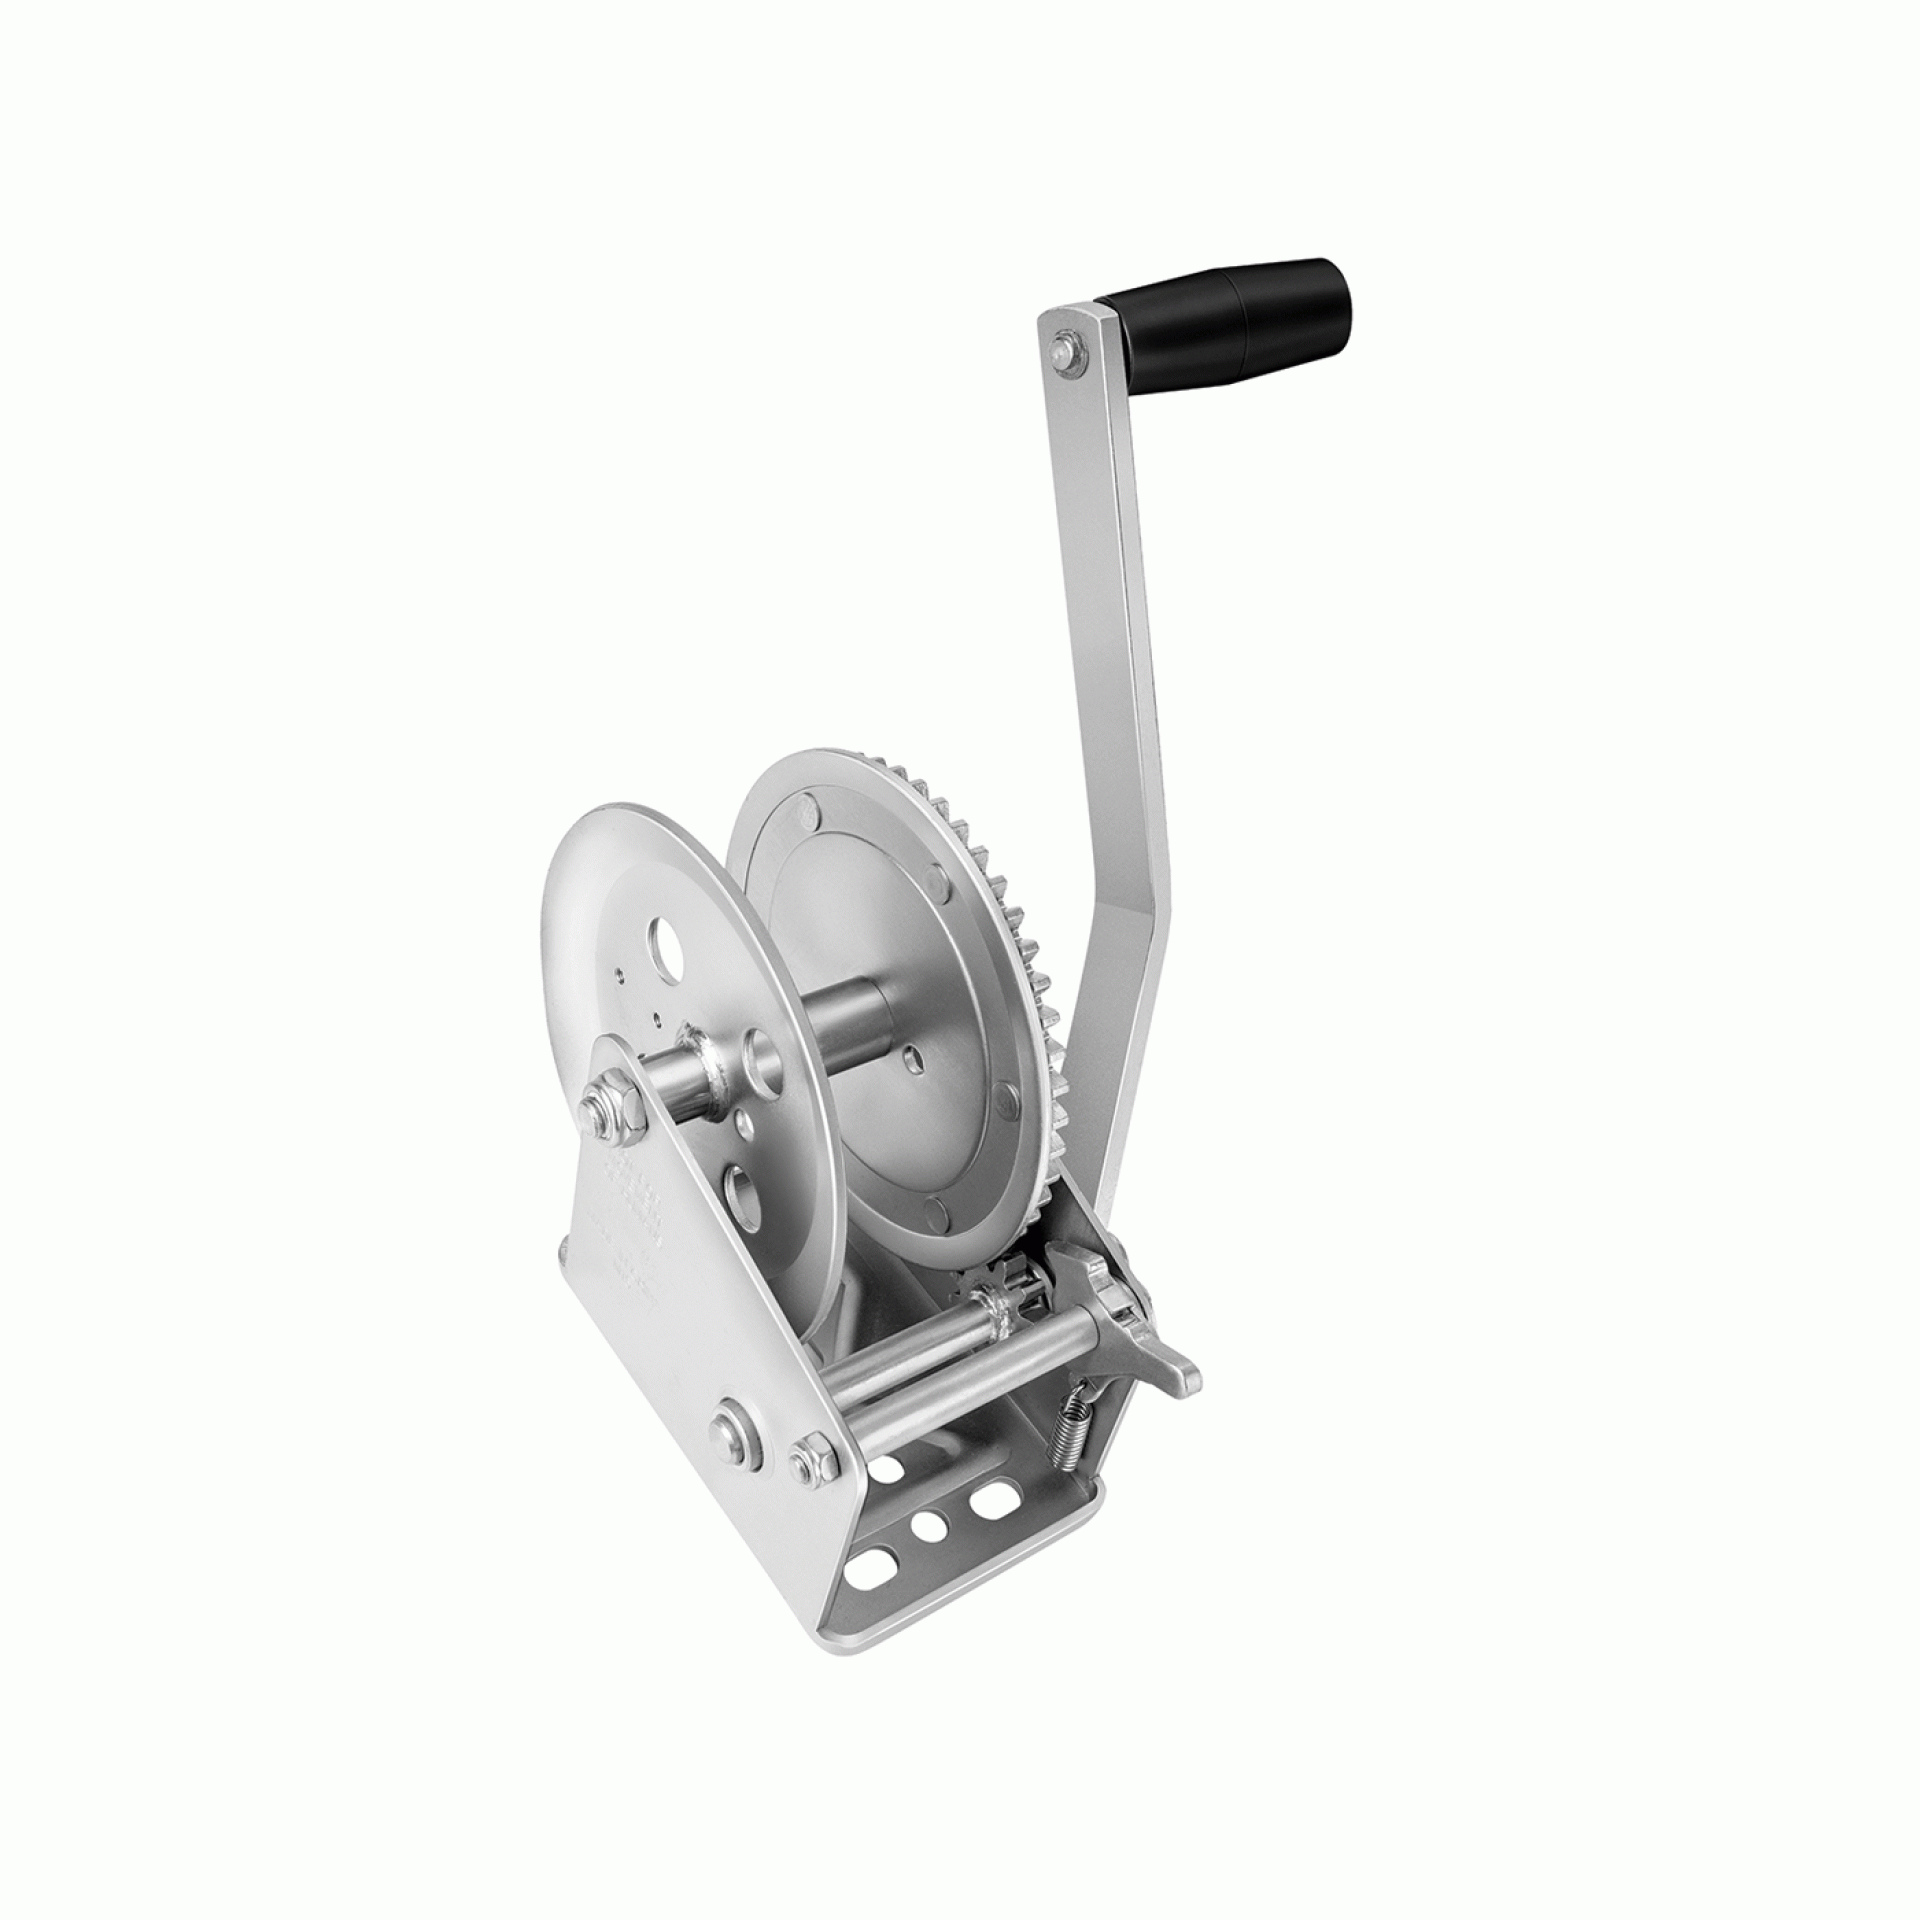 FULTON PERFORMANCE PRODUCTS | 142300 | Trailer Winch 1800 lb